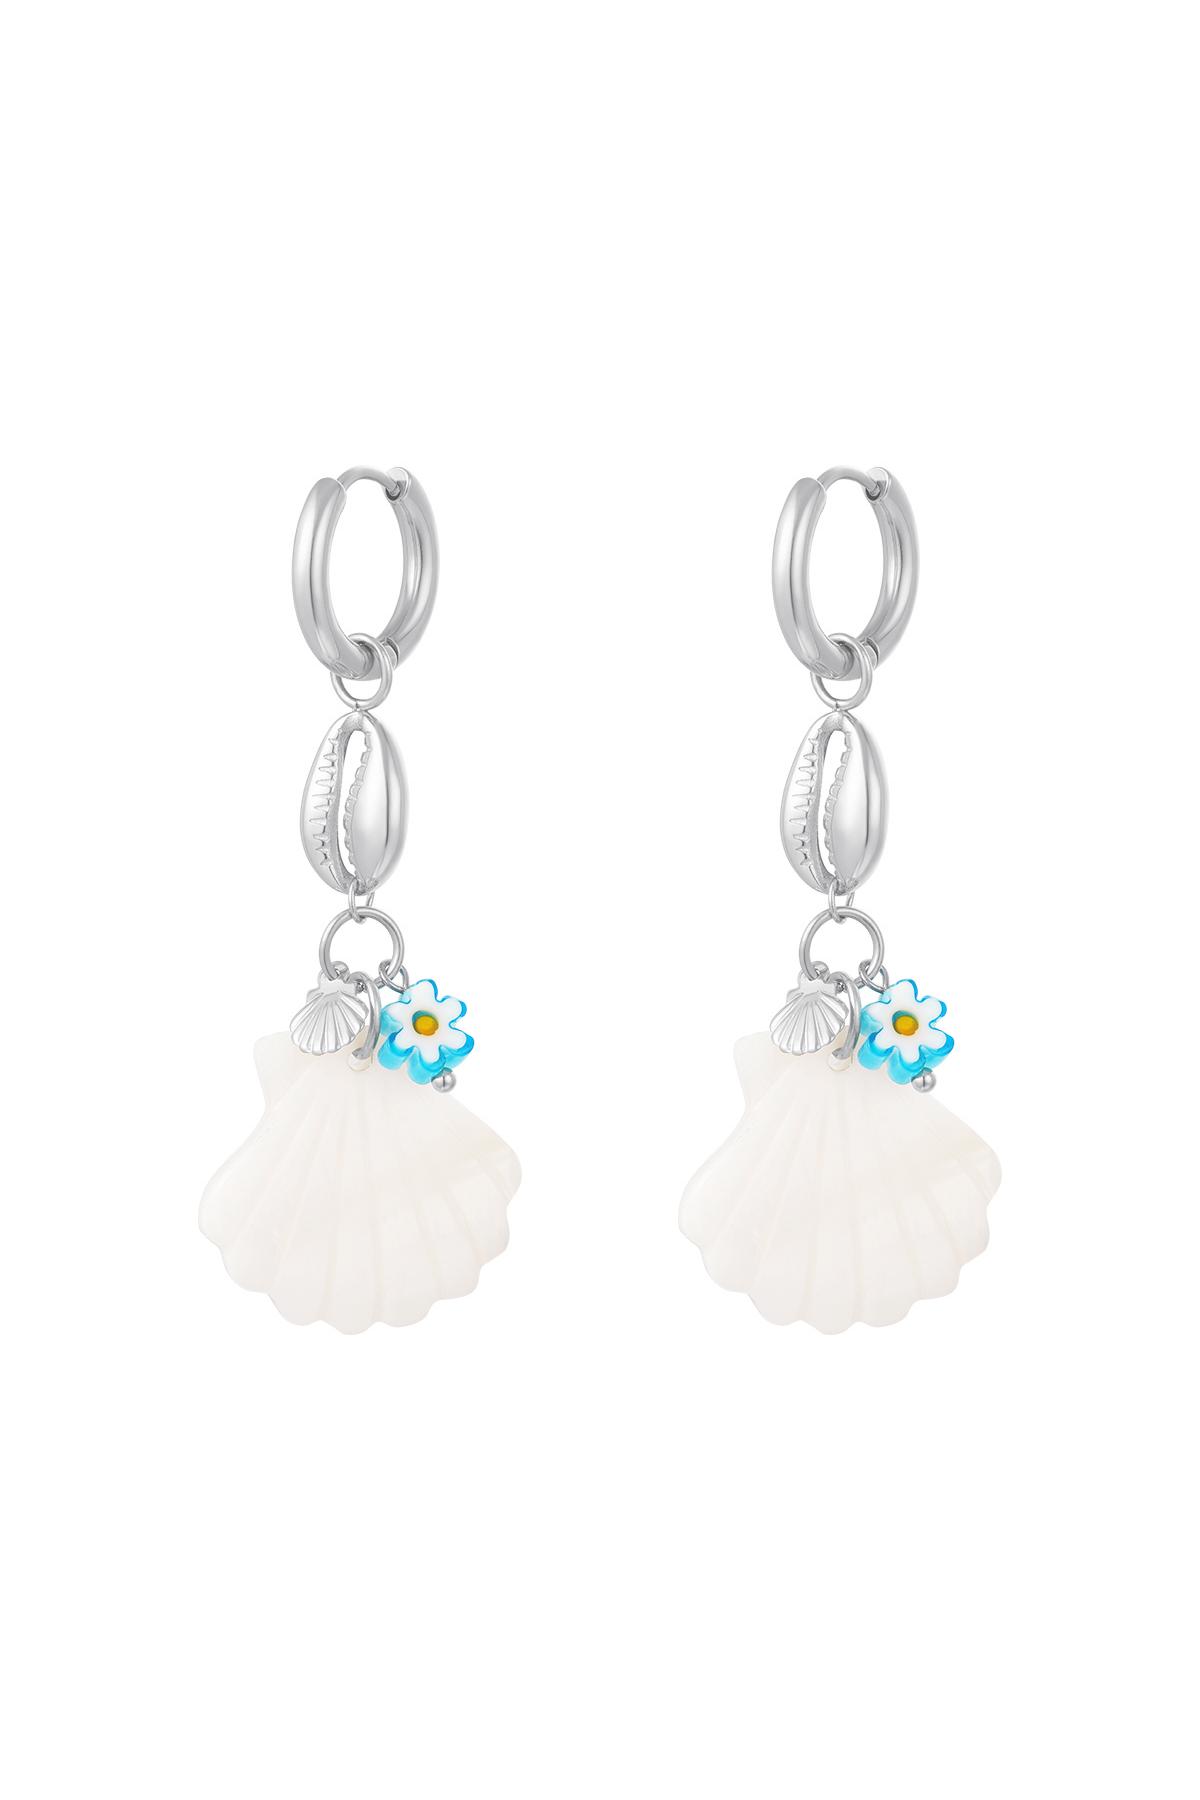 Blue daisy sea shell earrings - Beach collection Silver Stainless Steel h5 